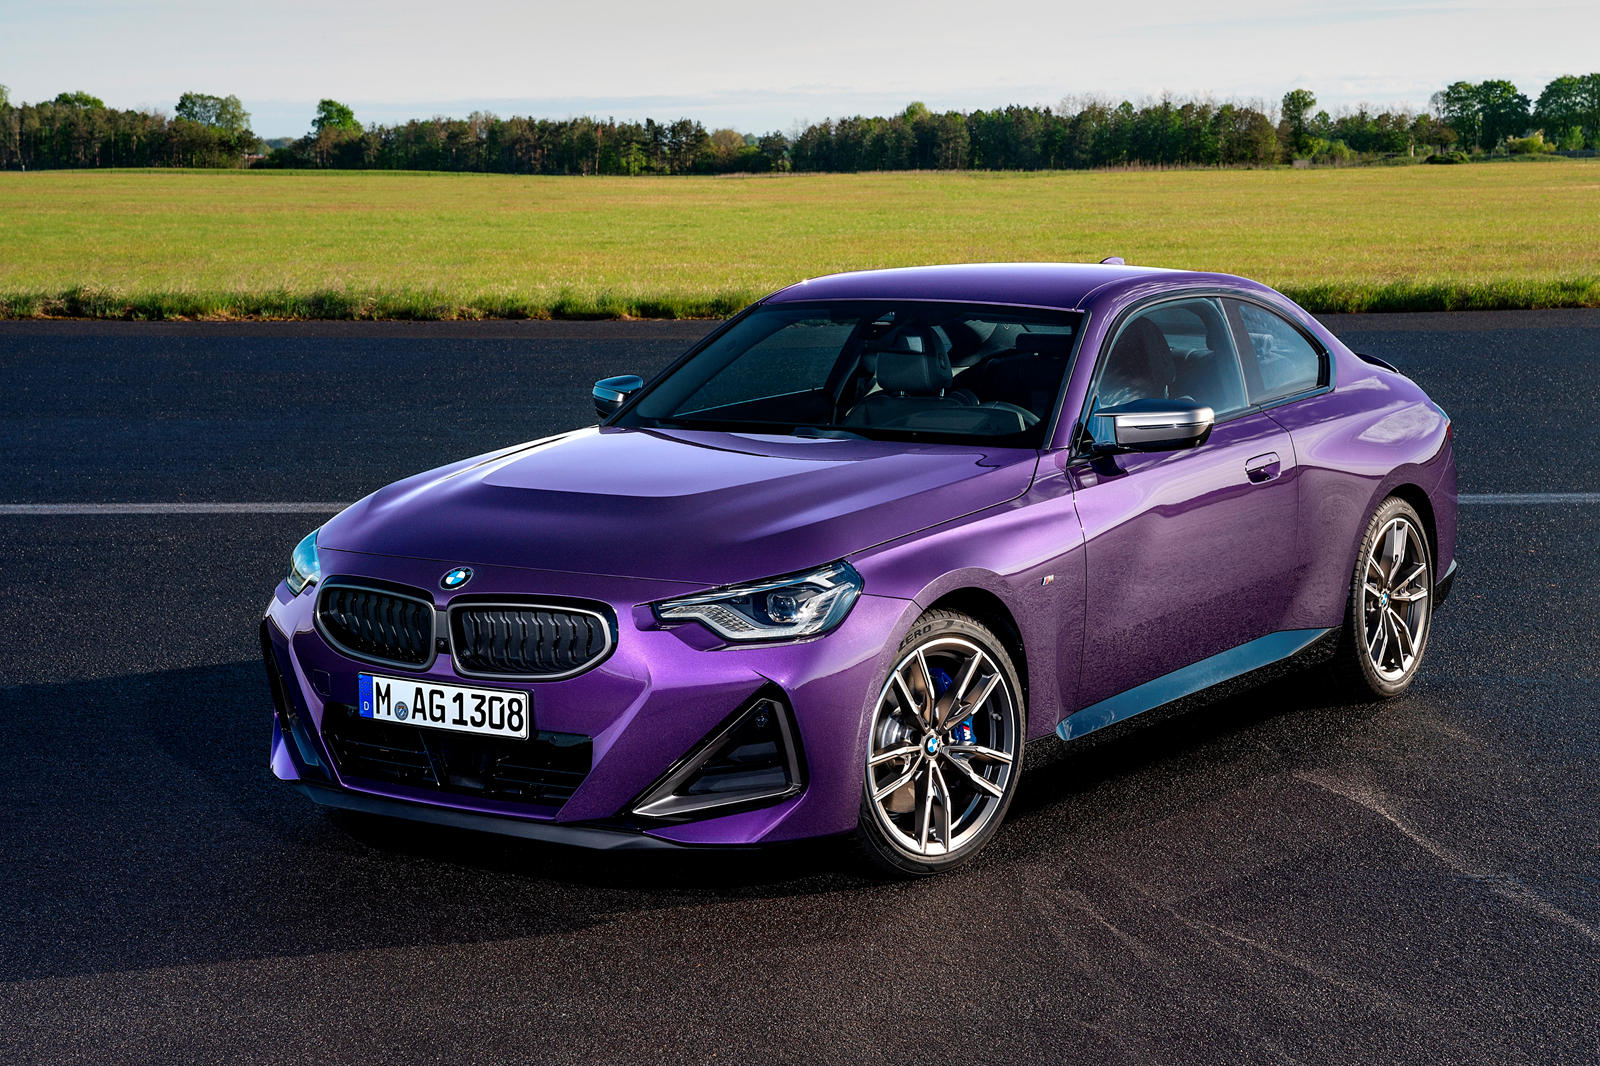 2022 BMW 2 Series Coupe Arrives With New Looks And Traditional RWD